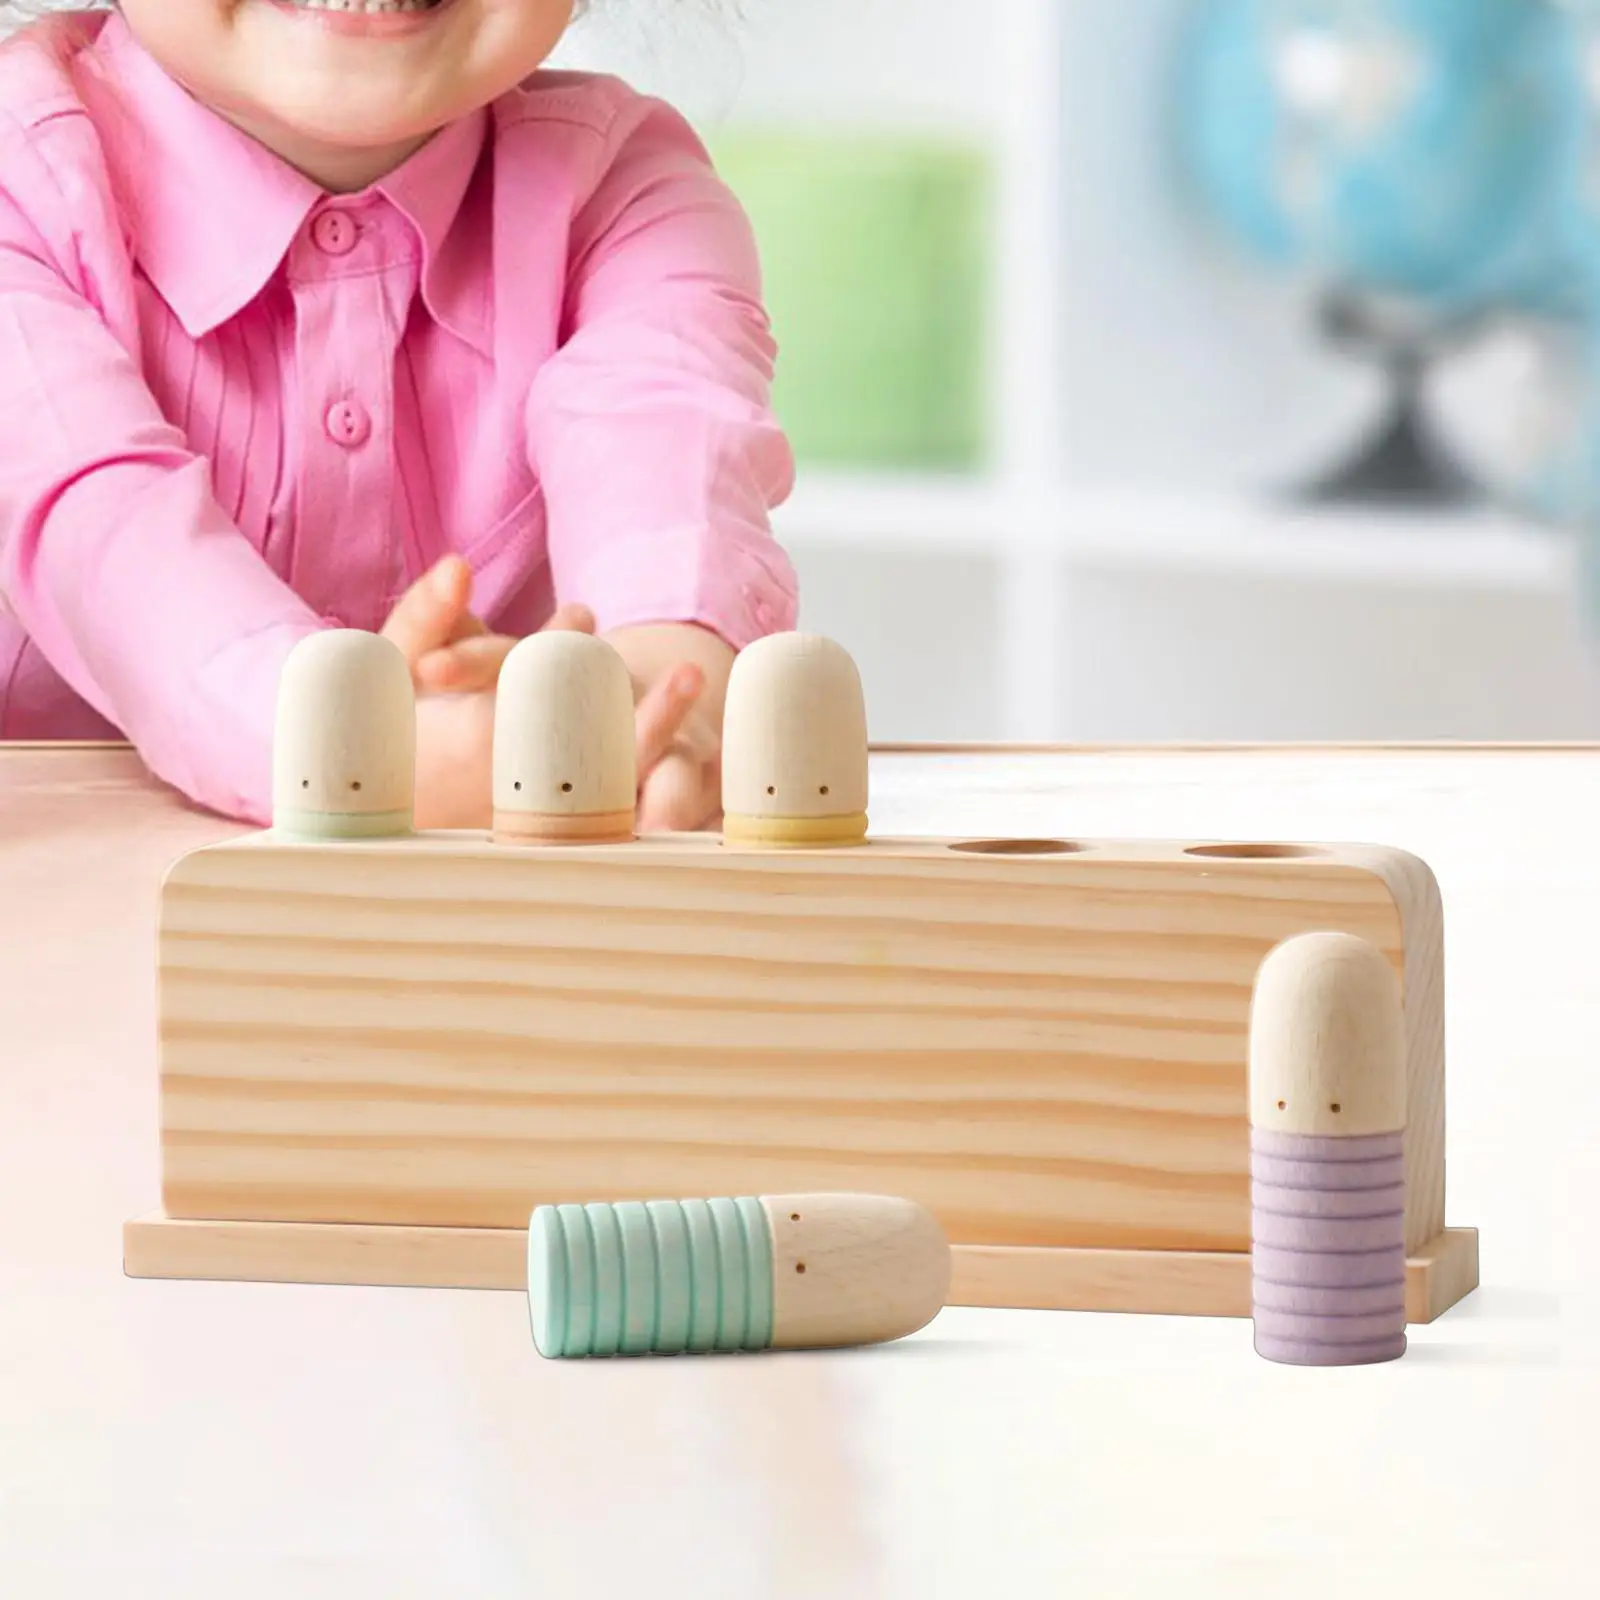 Wooden Rainbow Peg Dolls Shapes Sorting Toys Montessori Toys 5 Wood People Figures Cylinder Blocks for Toddler Birthday Gifts